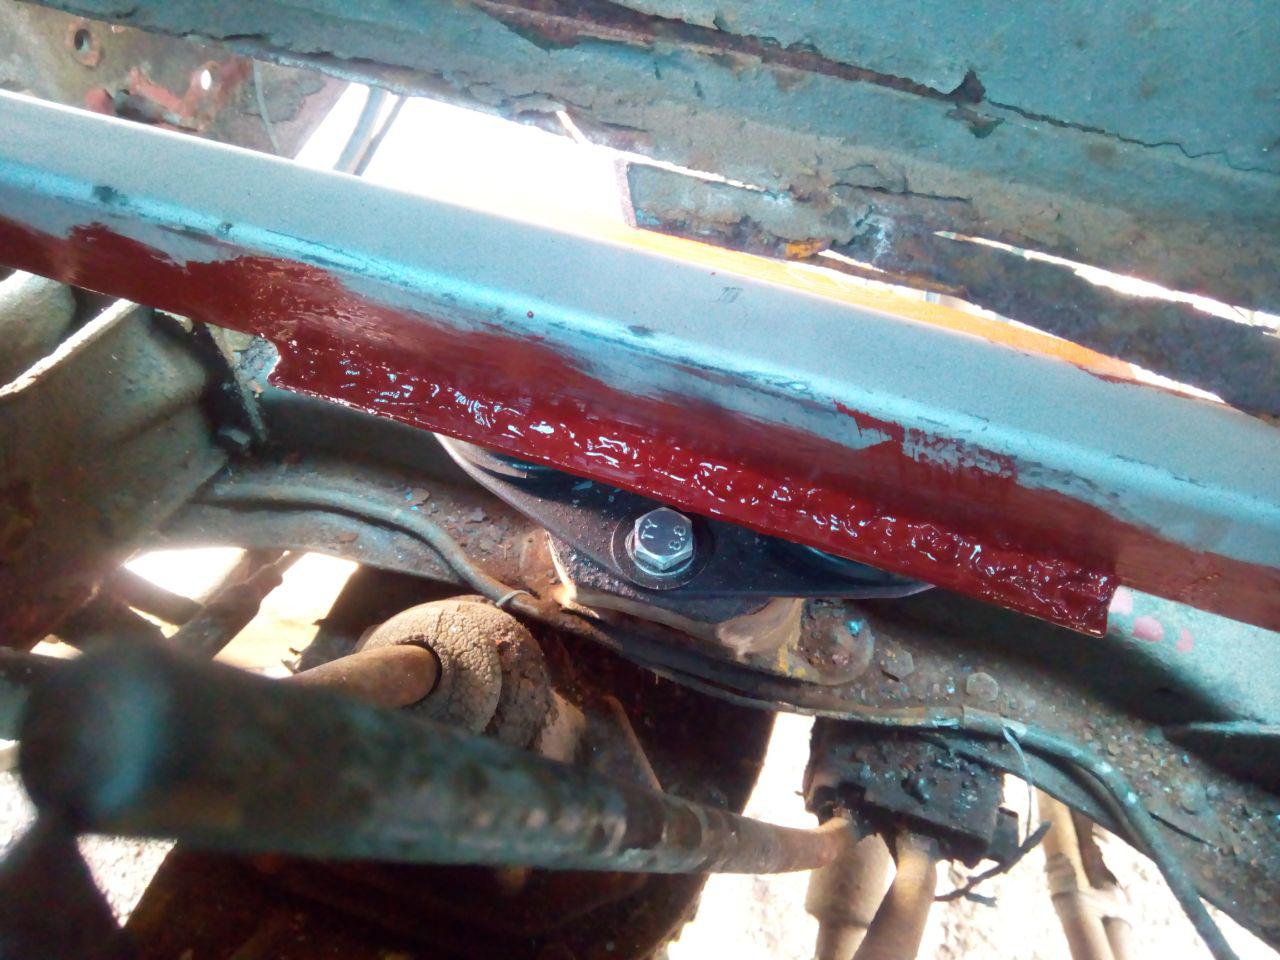 The rear cab mount viewed from the inside of the cab, fully
welded along the length of the bracket, and painted with red primer.